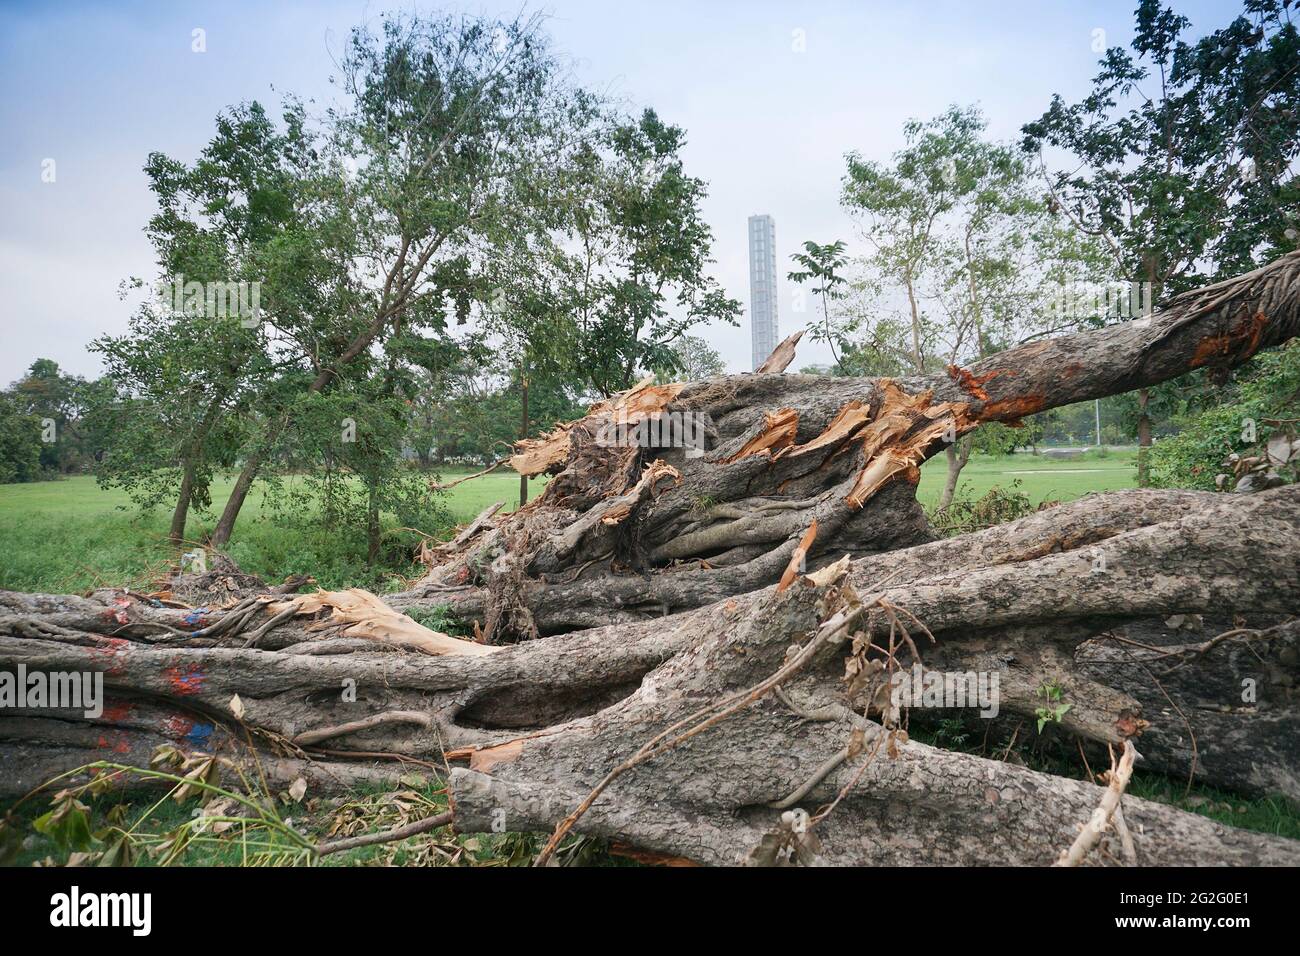 Kolkata, West Bengal, India - 21st May 2020 : Super cyclone Amphan has uprooted tree which fell on ground. The devastation has made many trees fall. H Stock Photo